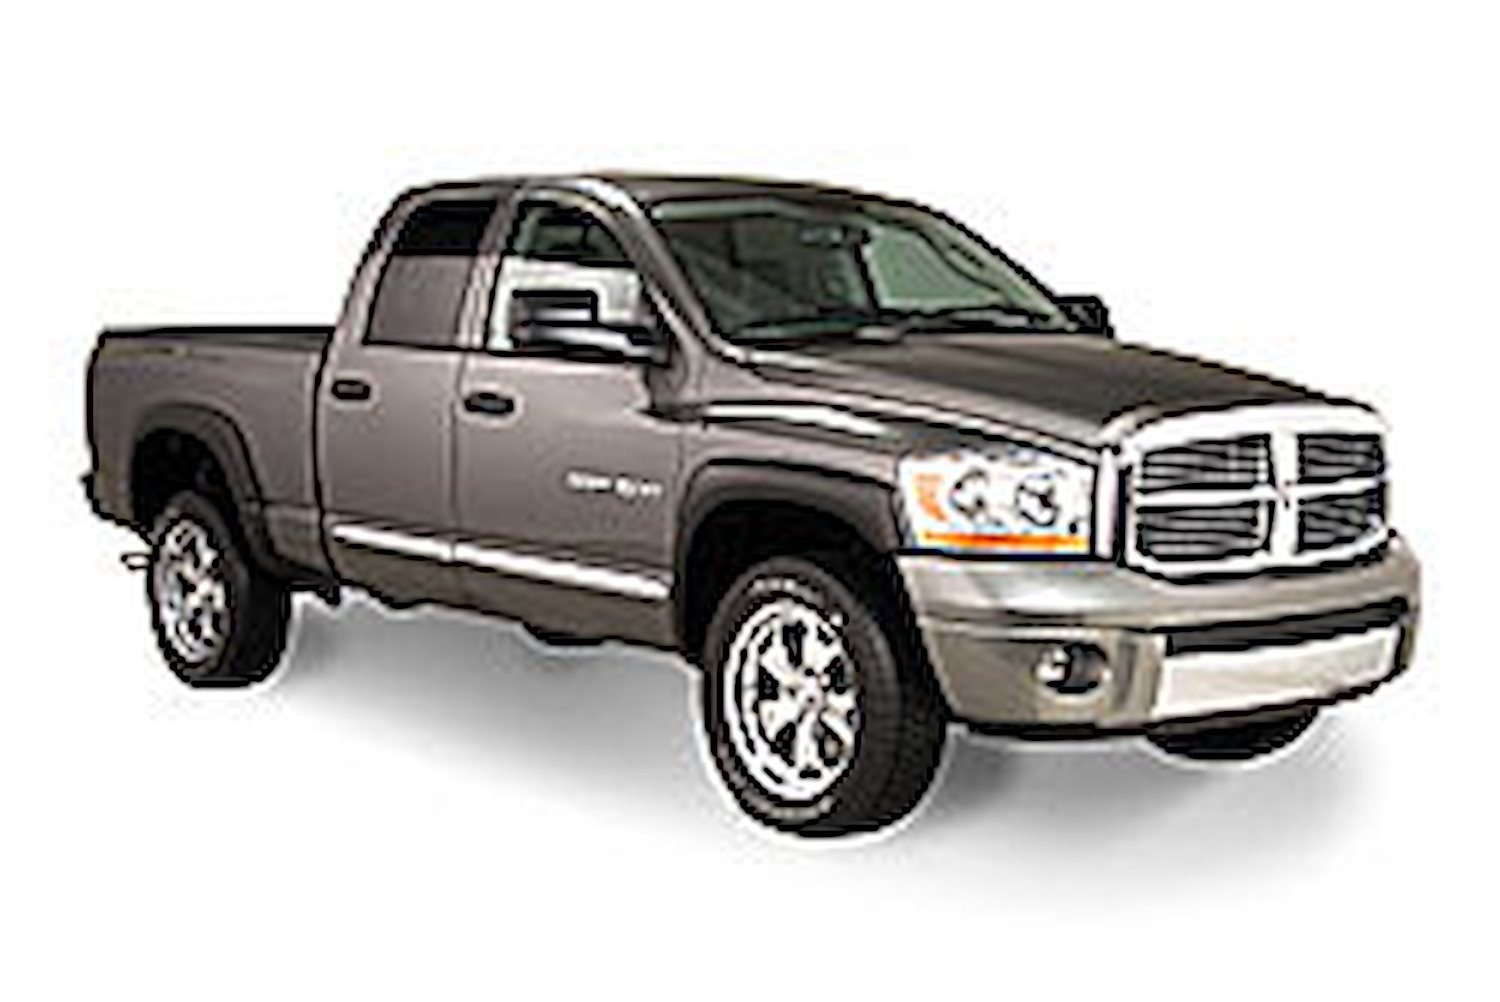 OE-Style Fender Flares 2006-09 Dodge Ram 1500/2500/3500 (6"4" Bed)